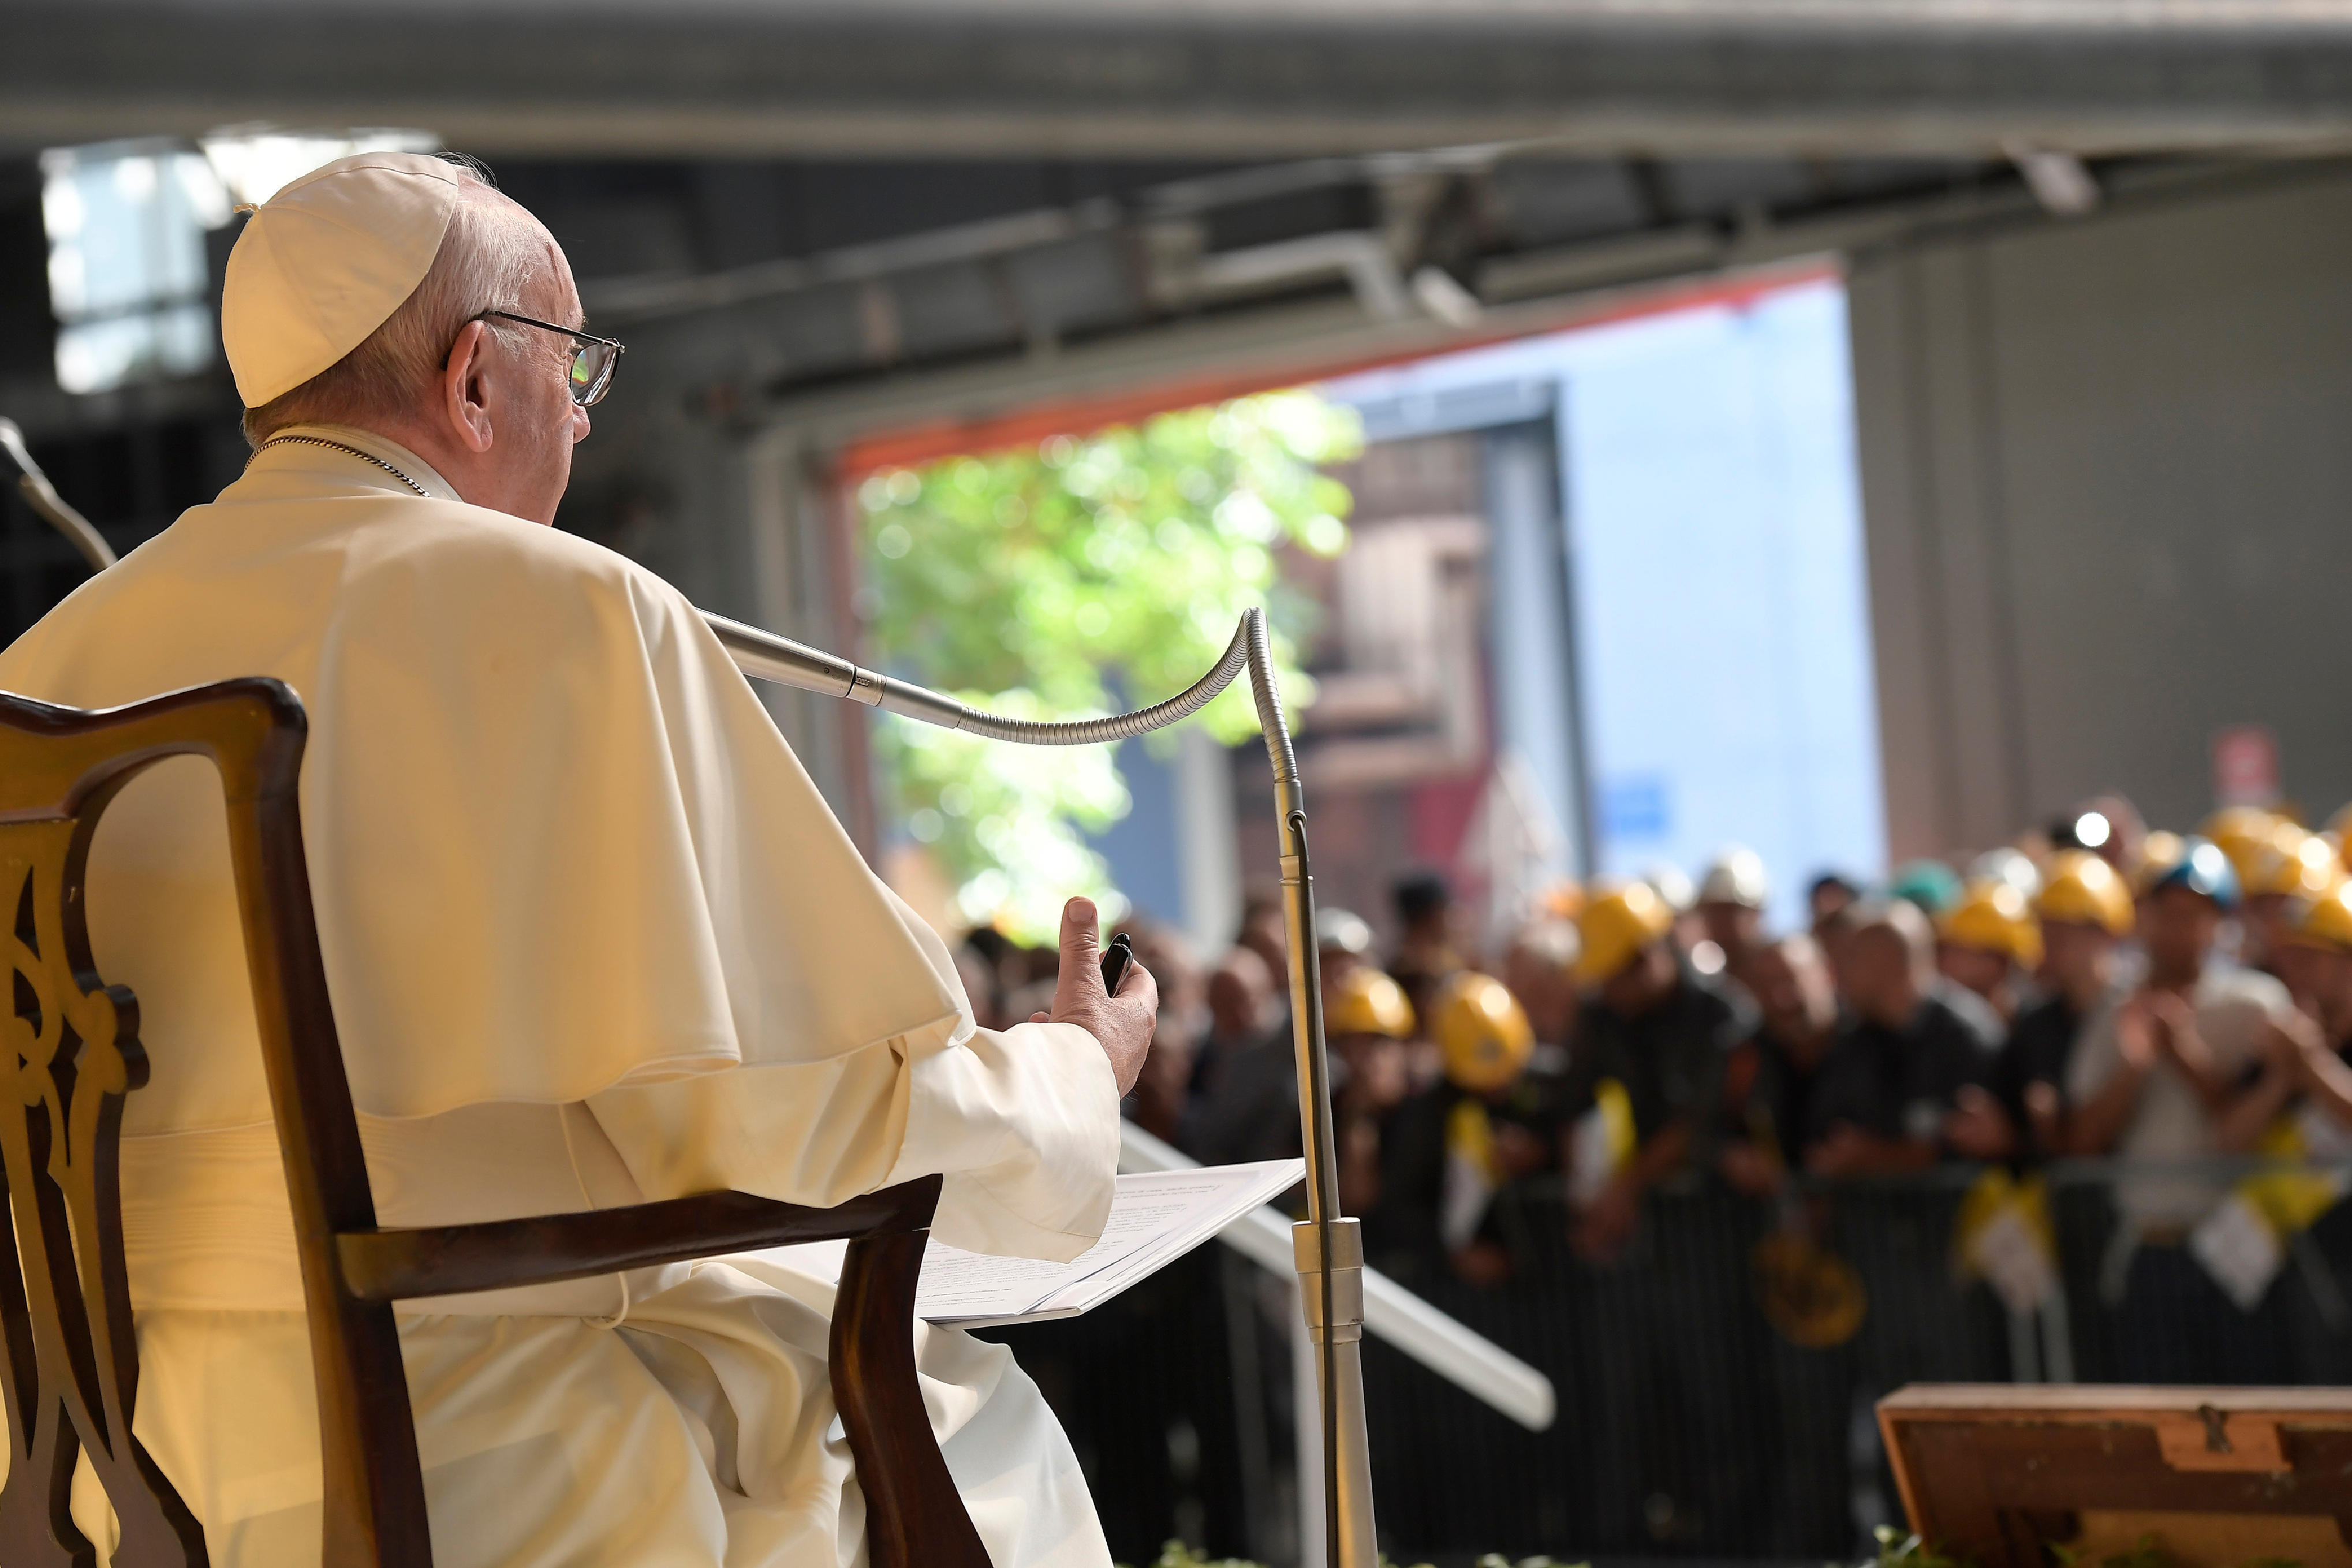 Pope Francis speaks at the ILVA steel-making company in Genoa, Italy, Saturday, May 27, 2017. Pope Francis has begun a one-day visit to the northern Italian port city of Genoa to meet with workers, poor and homeless people, refugees and prisoners (L'Osservatore Romano/Pool Photo via AP) Italy Pope